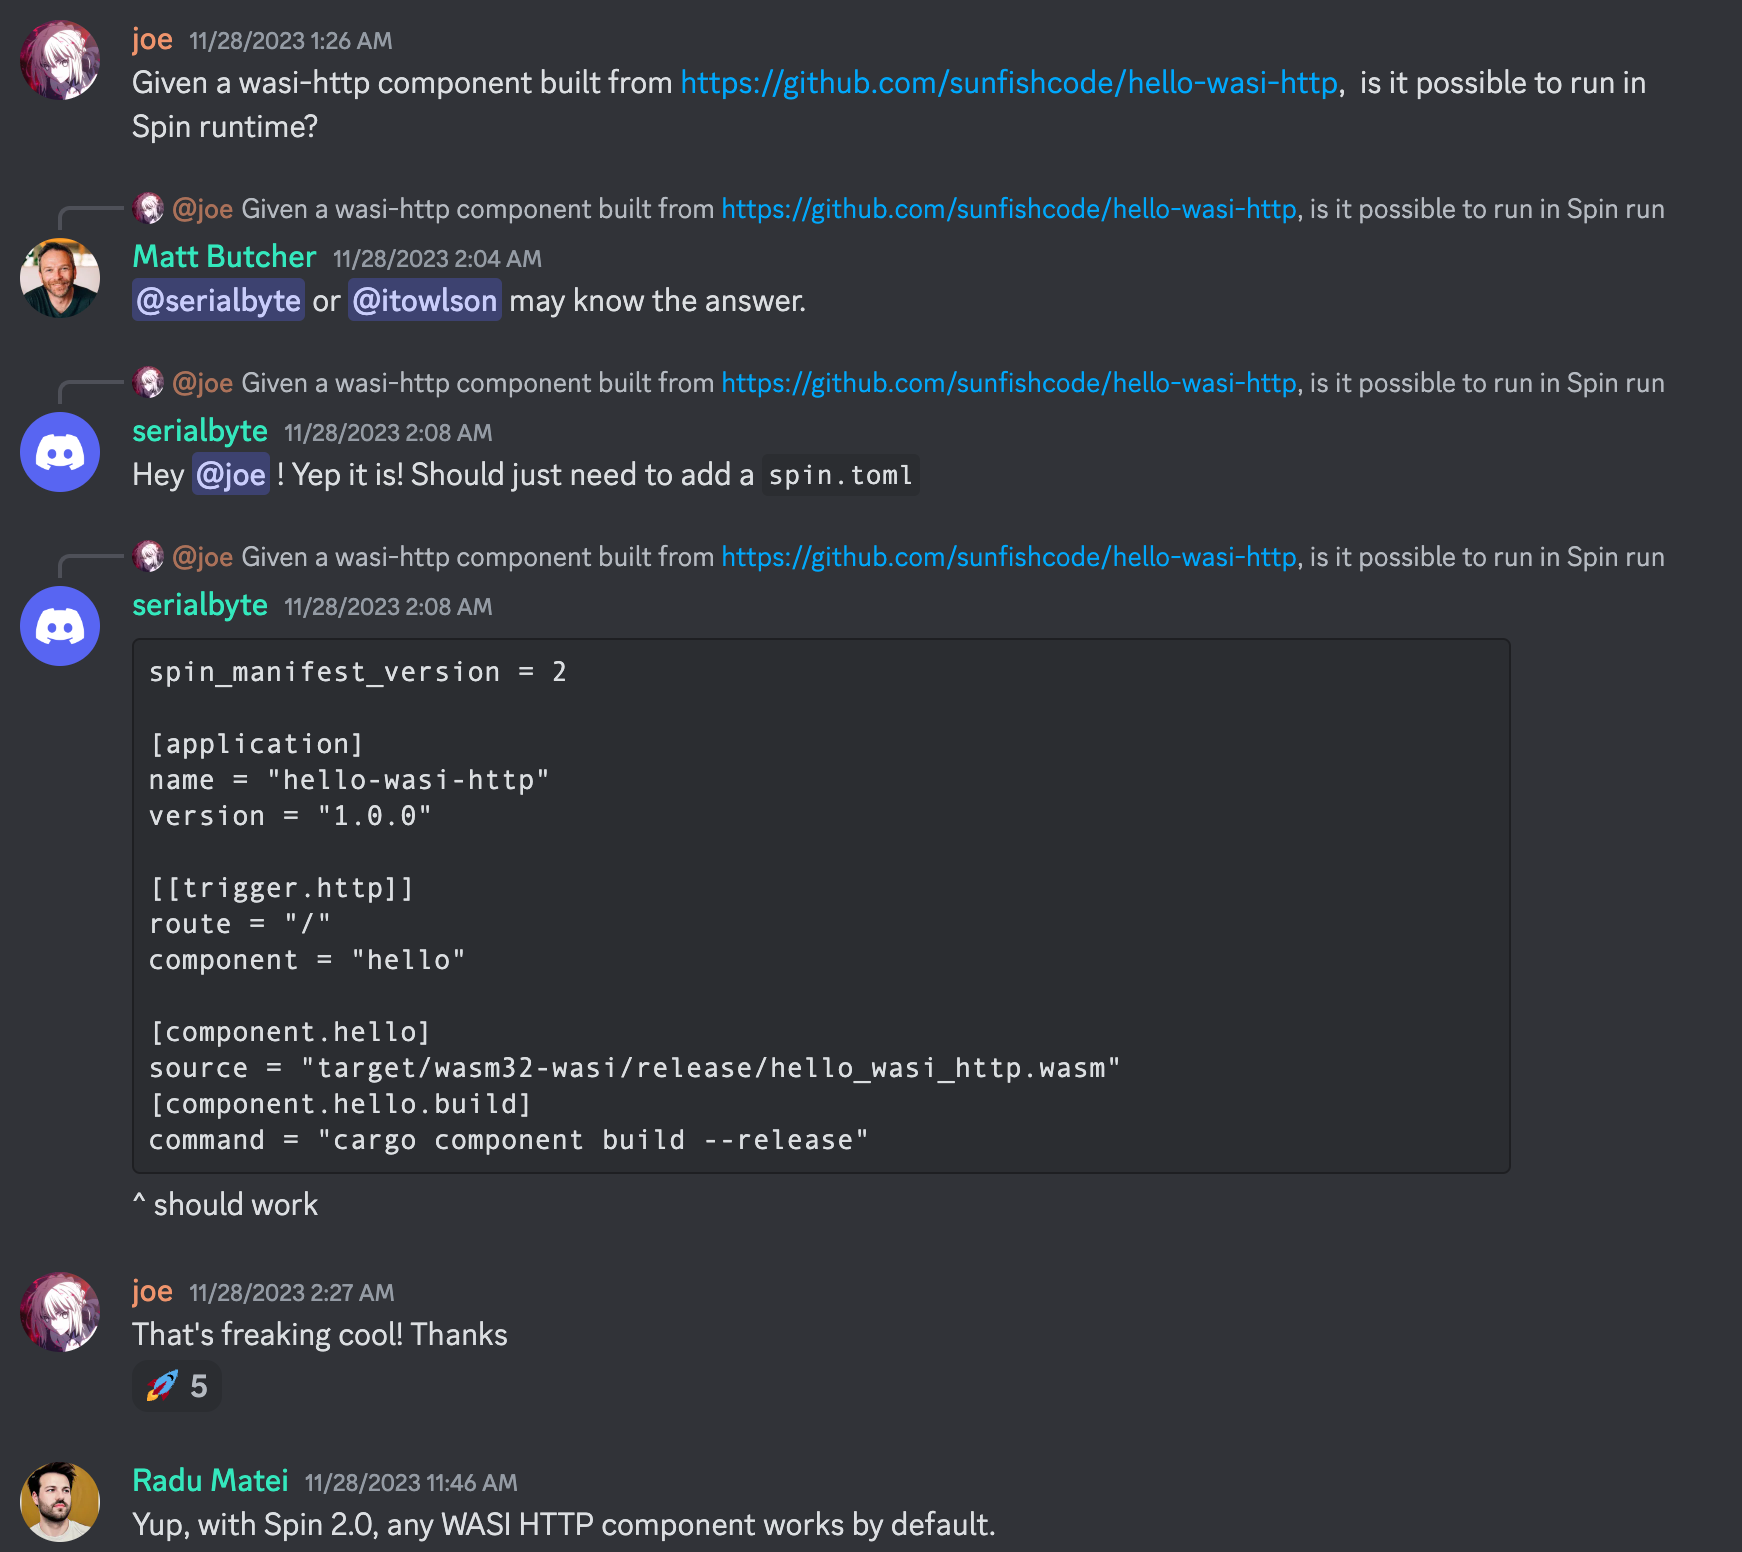 Discord chat, praising compatibility across Wasmtime and Spin